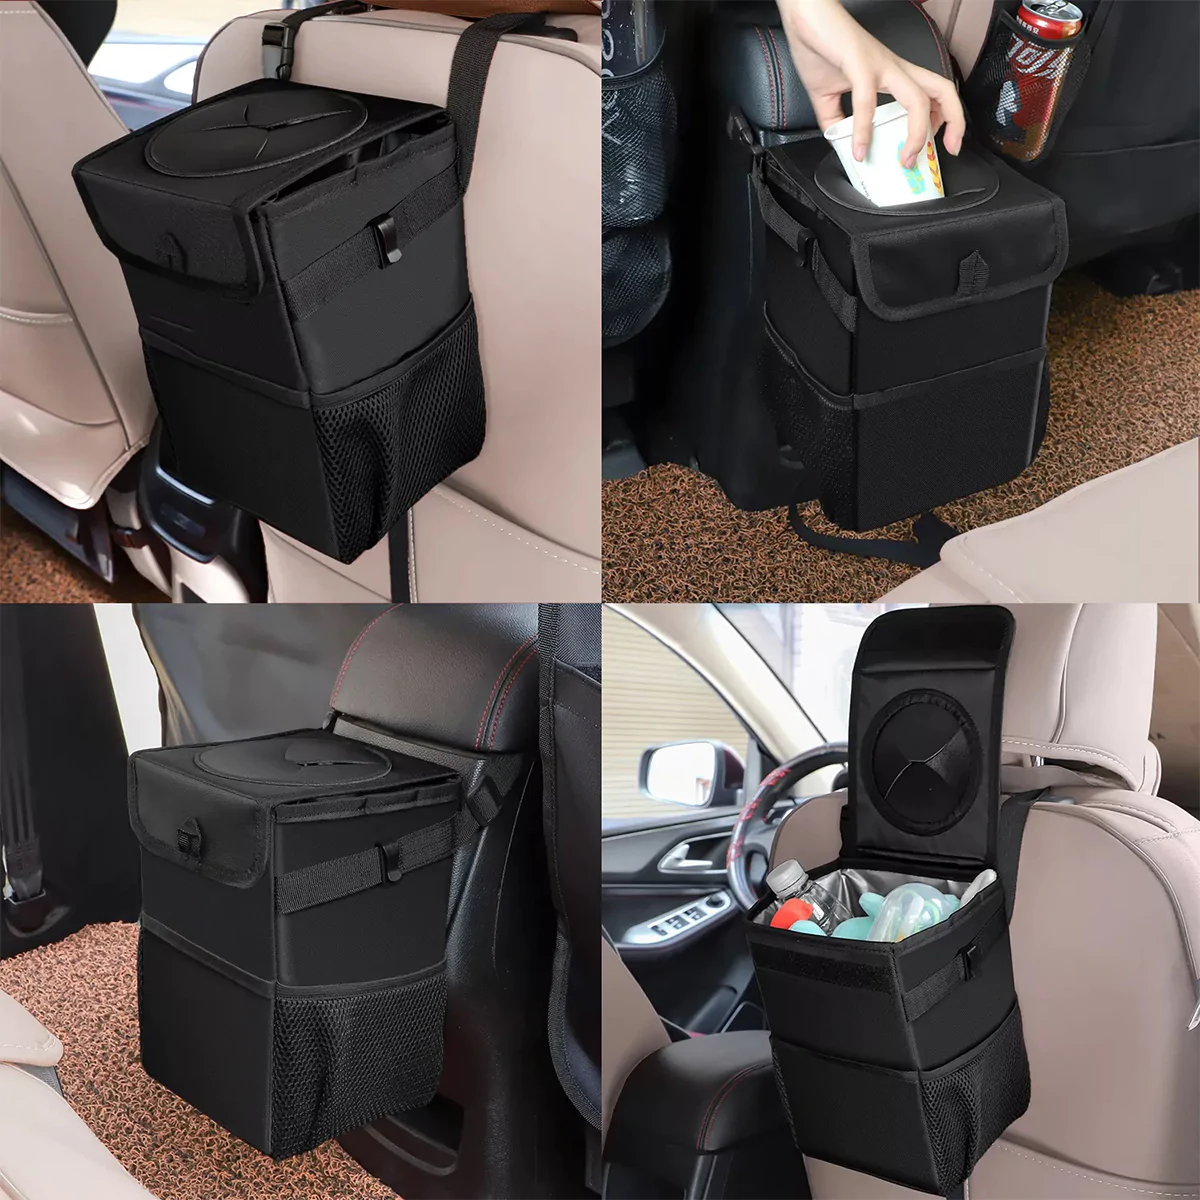 Waterproof Car Trash Can with Lid and Storage Pockets, Custom-Fit For Car, 100% Leak-Proof Car Organizer, Waterproof Car Garbage Can, Multipurpose Trash Bin for Car DLNS234